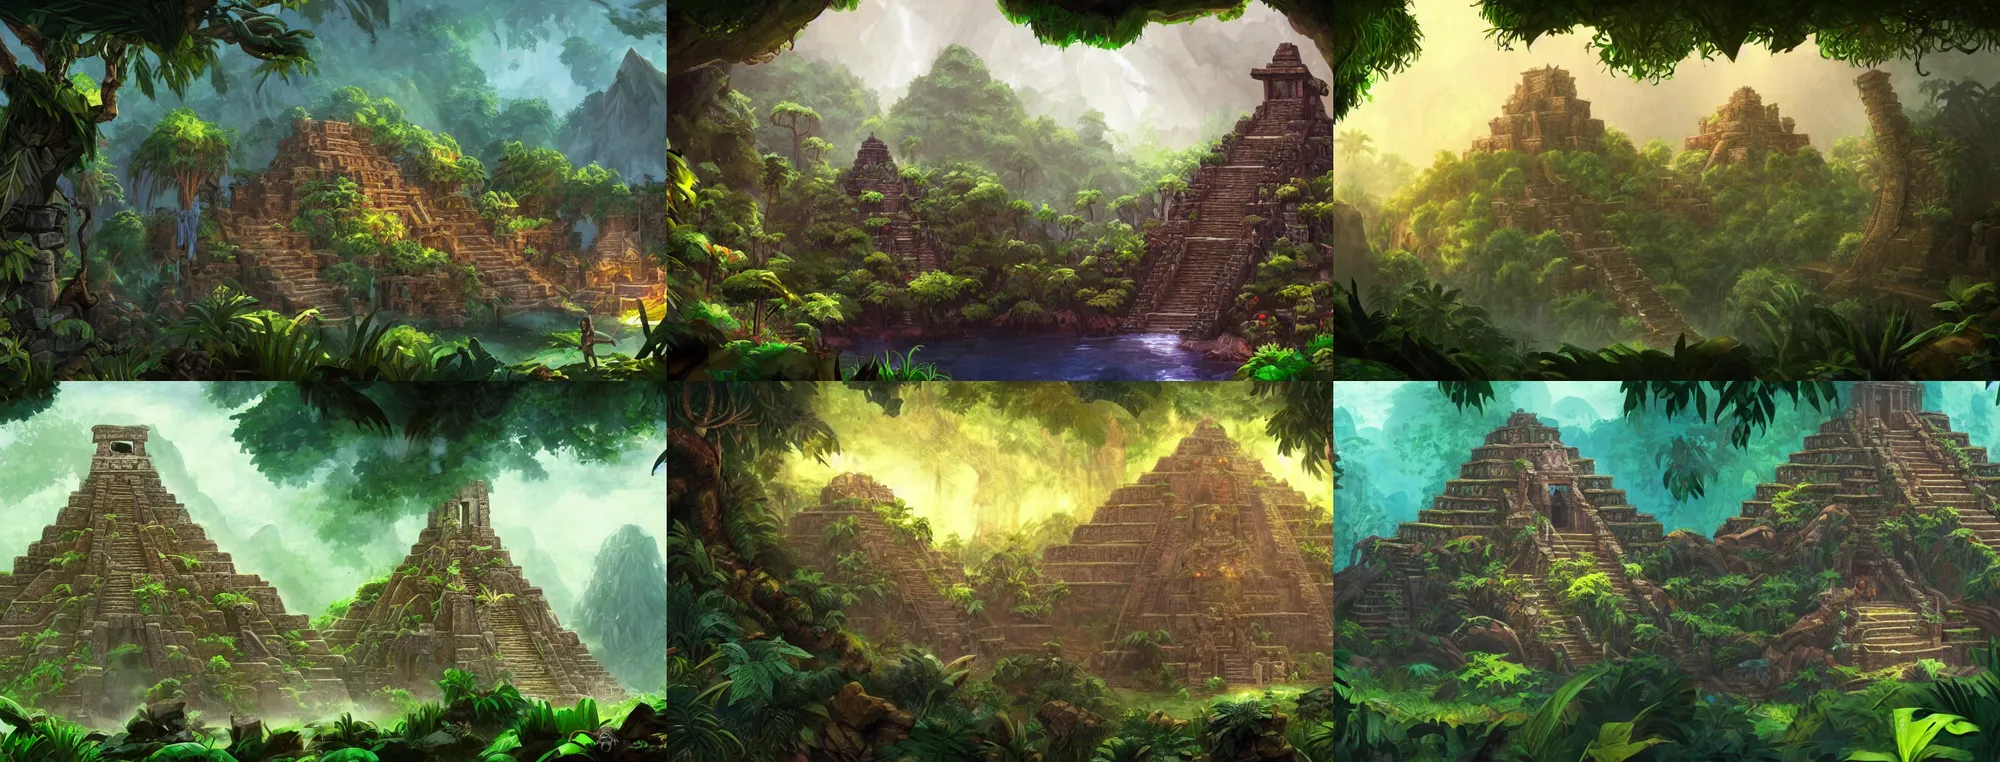 aztec temple hidden in jungle, lush forest, mountains, | Stable ...